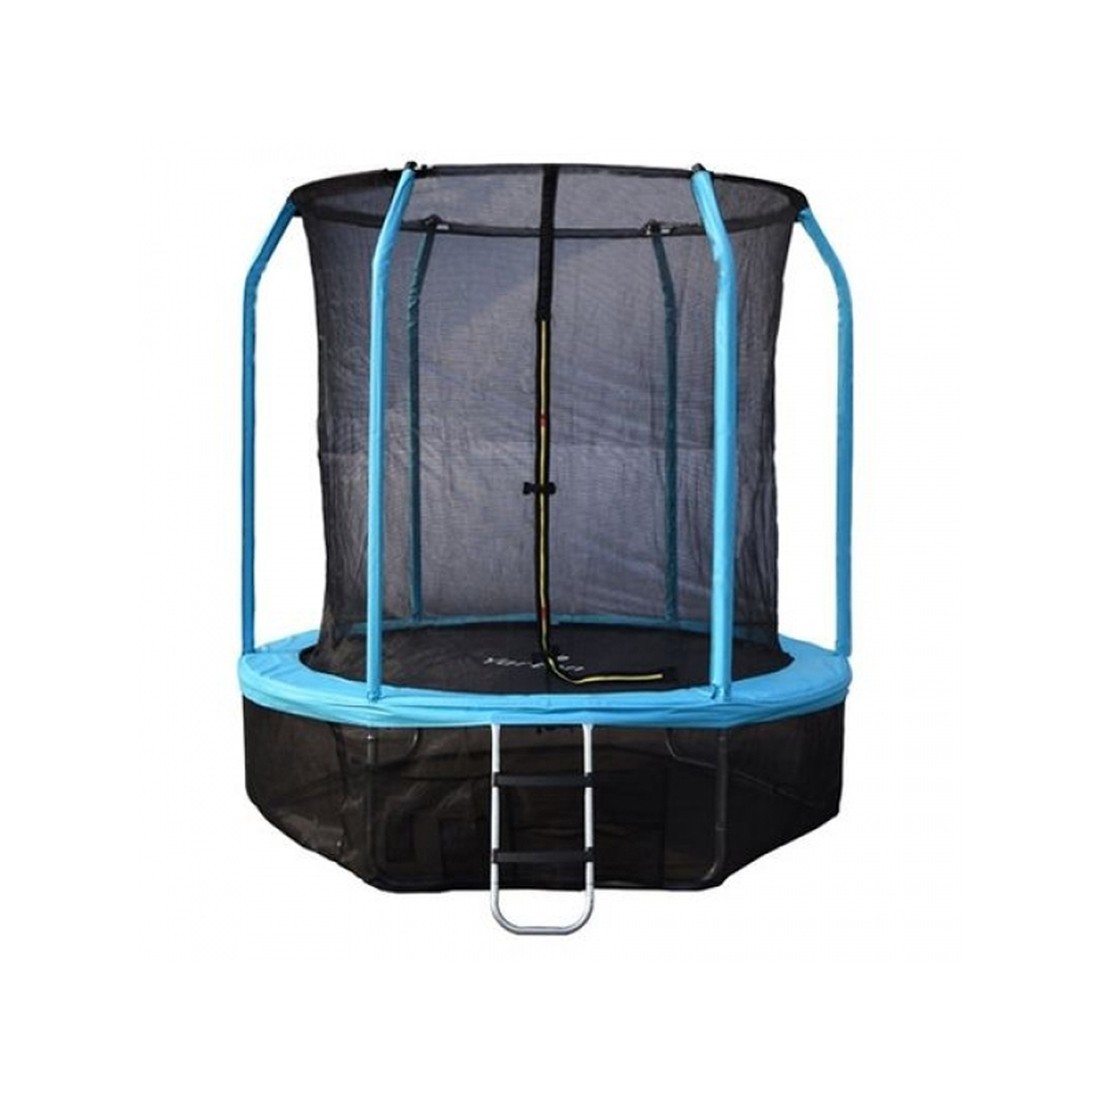 Shop Trampoline 14FT - TheOutfit, delivered to your home | TheOutfit